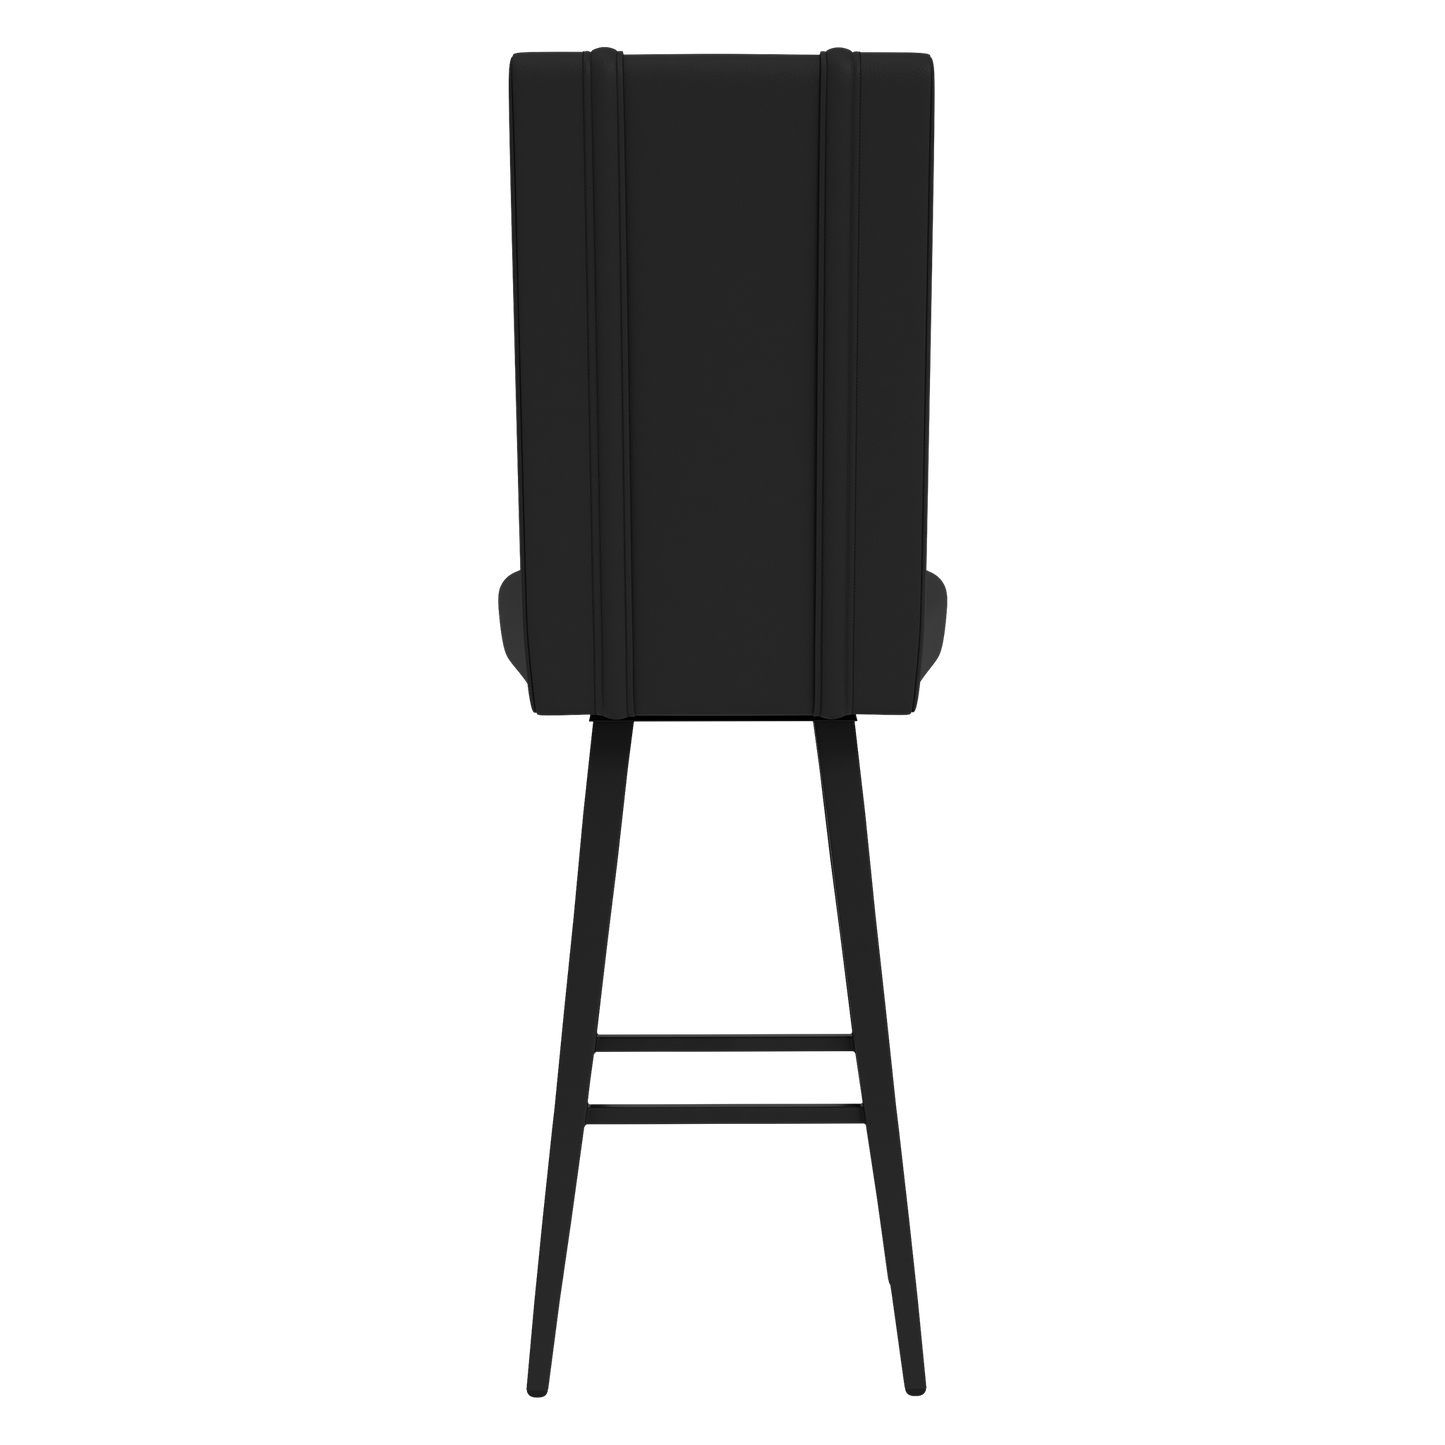 Swivel Bar Stool 2000 with Youngstown Pete Logo